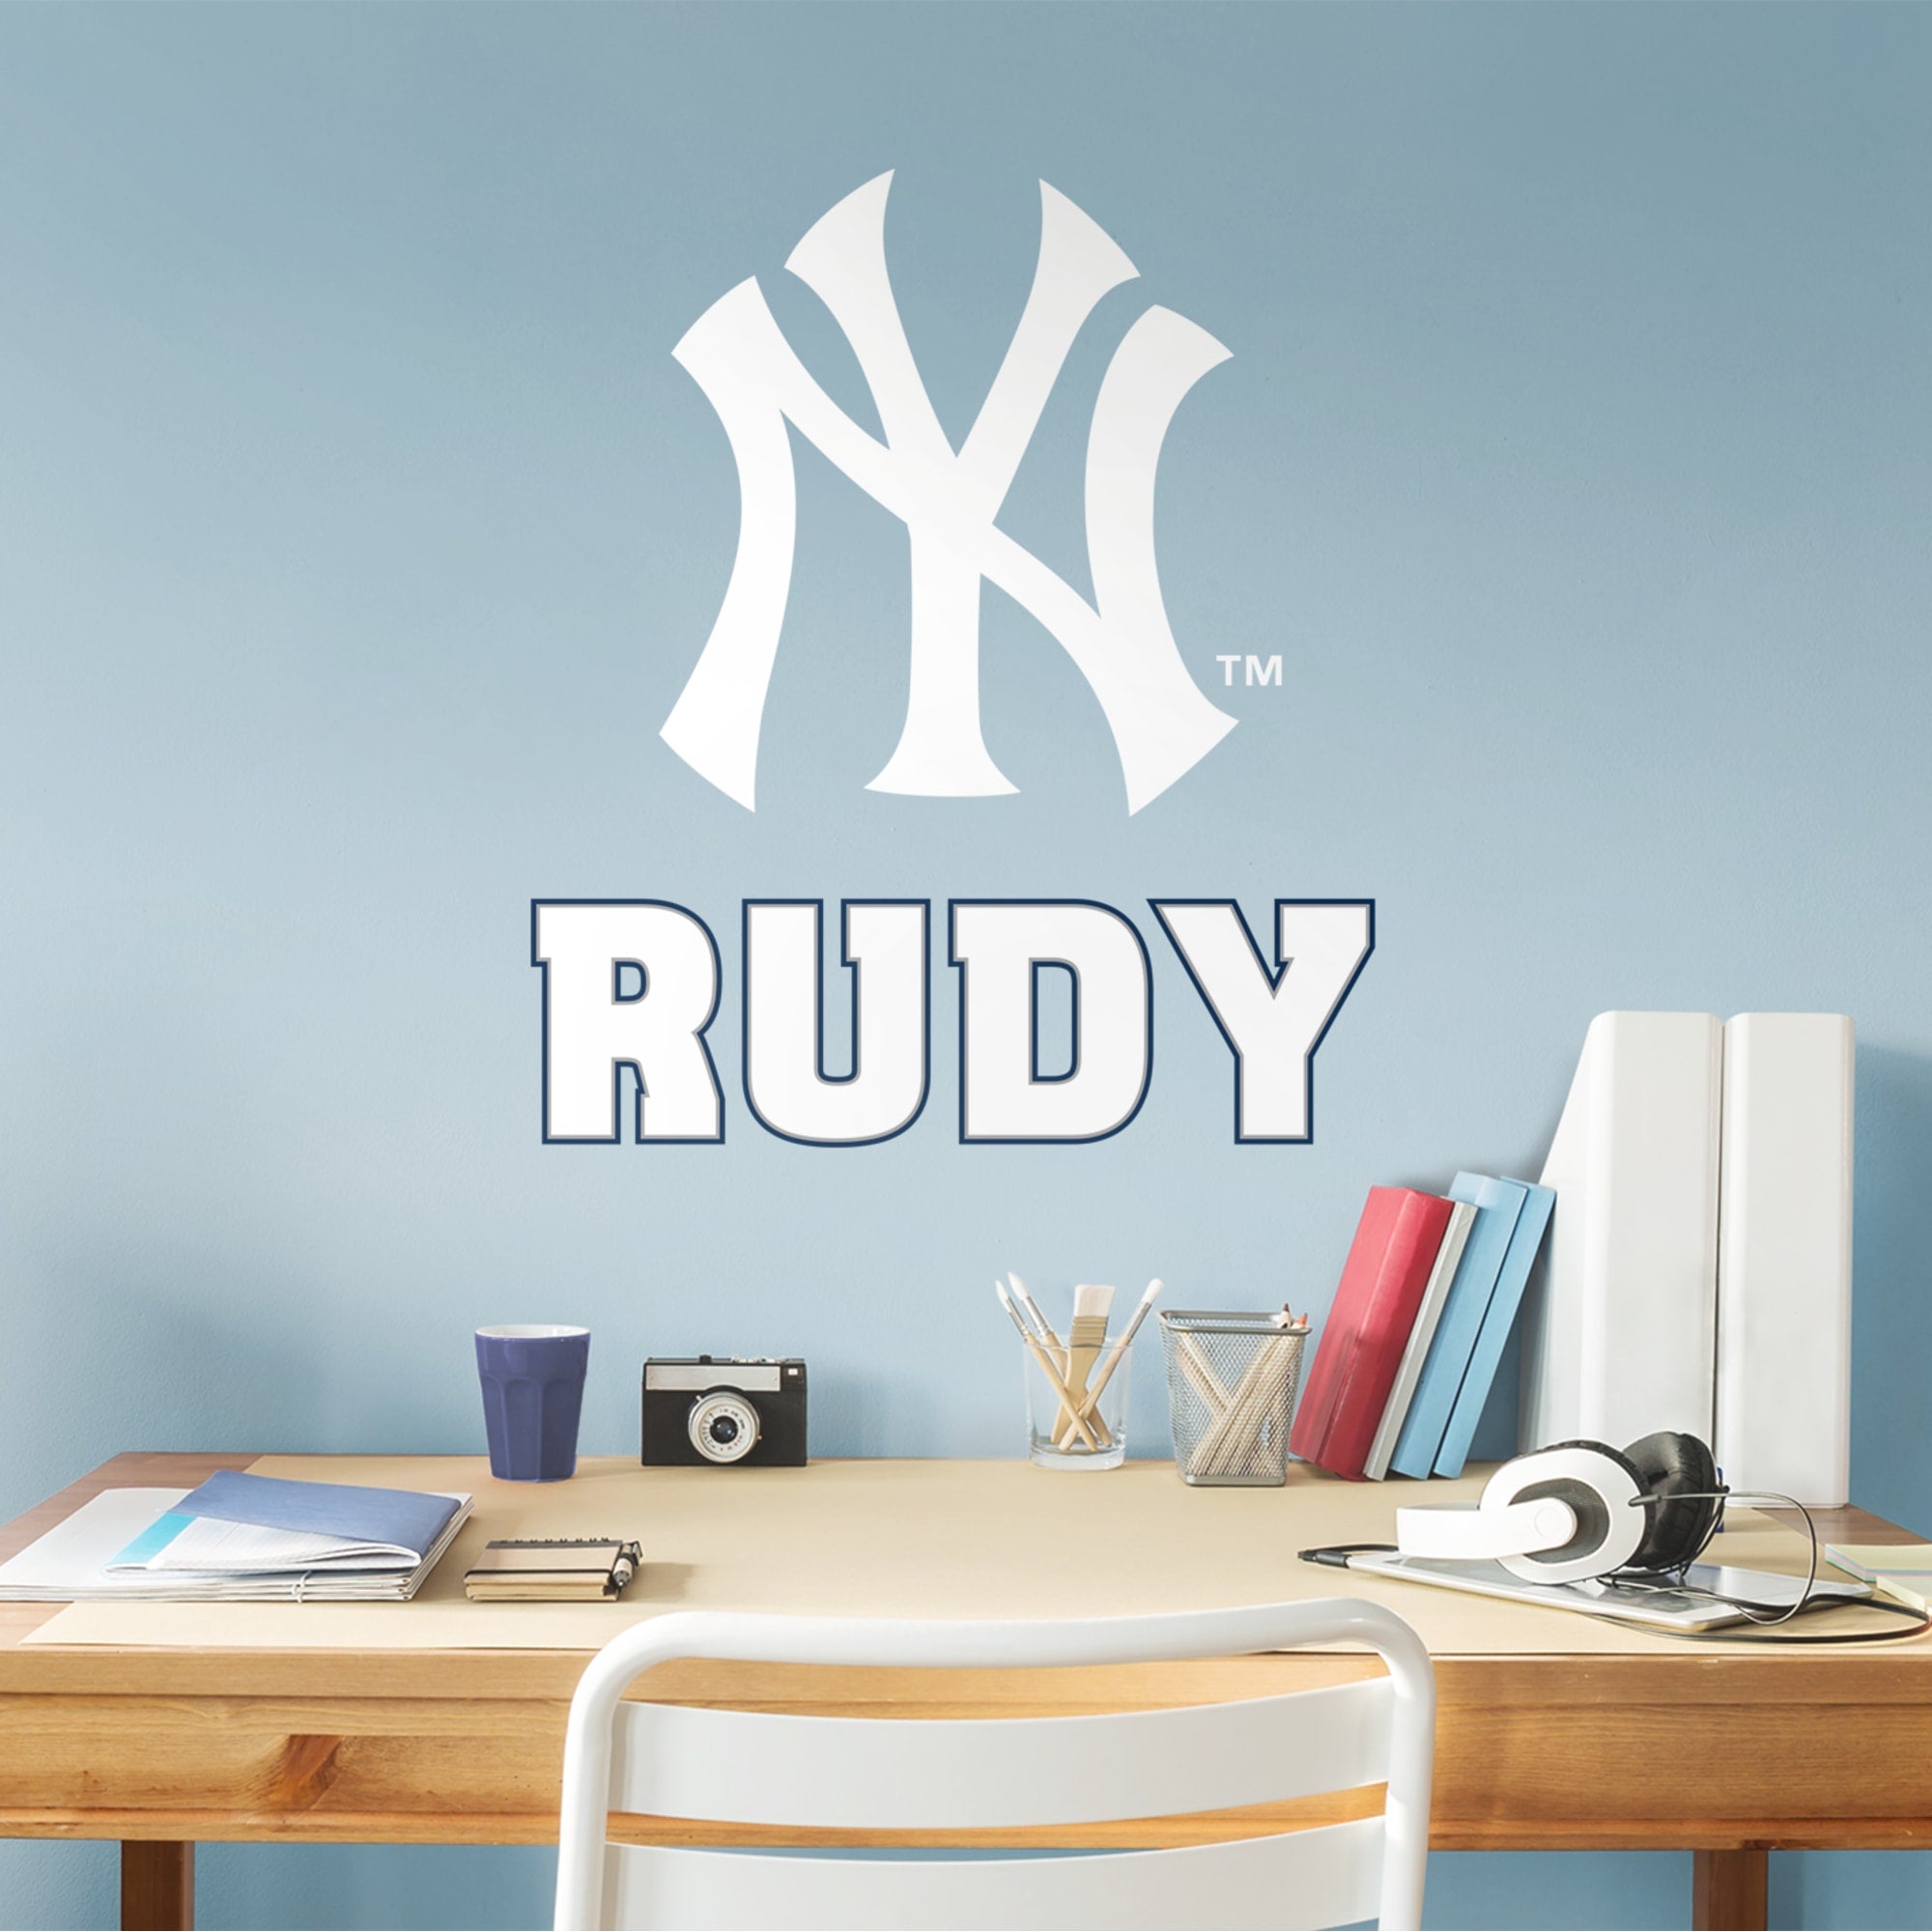 New York Yankees: Stacked "NY" Personalized Name - Officially Licensed MLB Transfer Decal in White (52"W x 39.5"H) by Fathead |